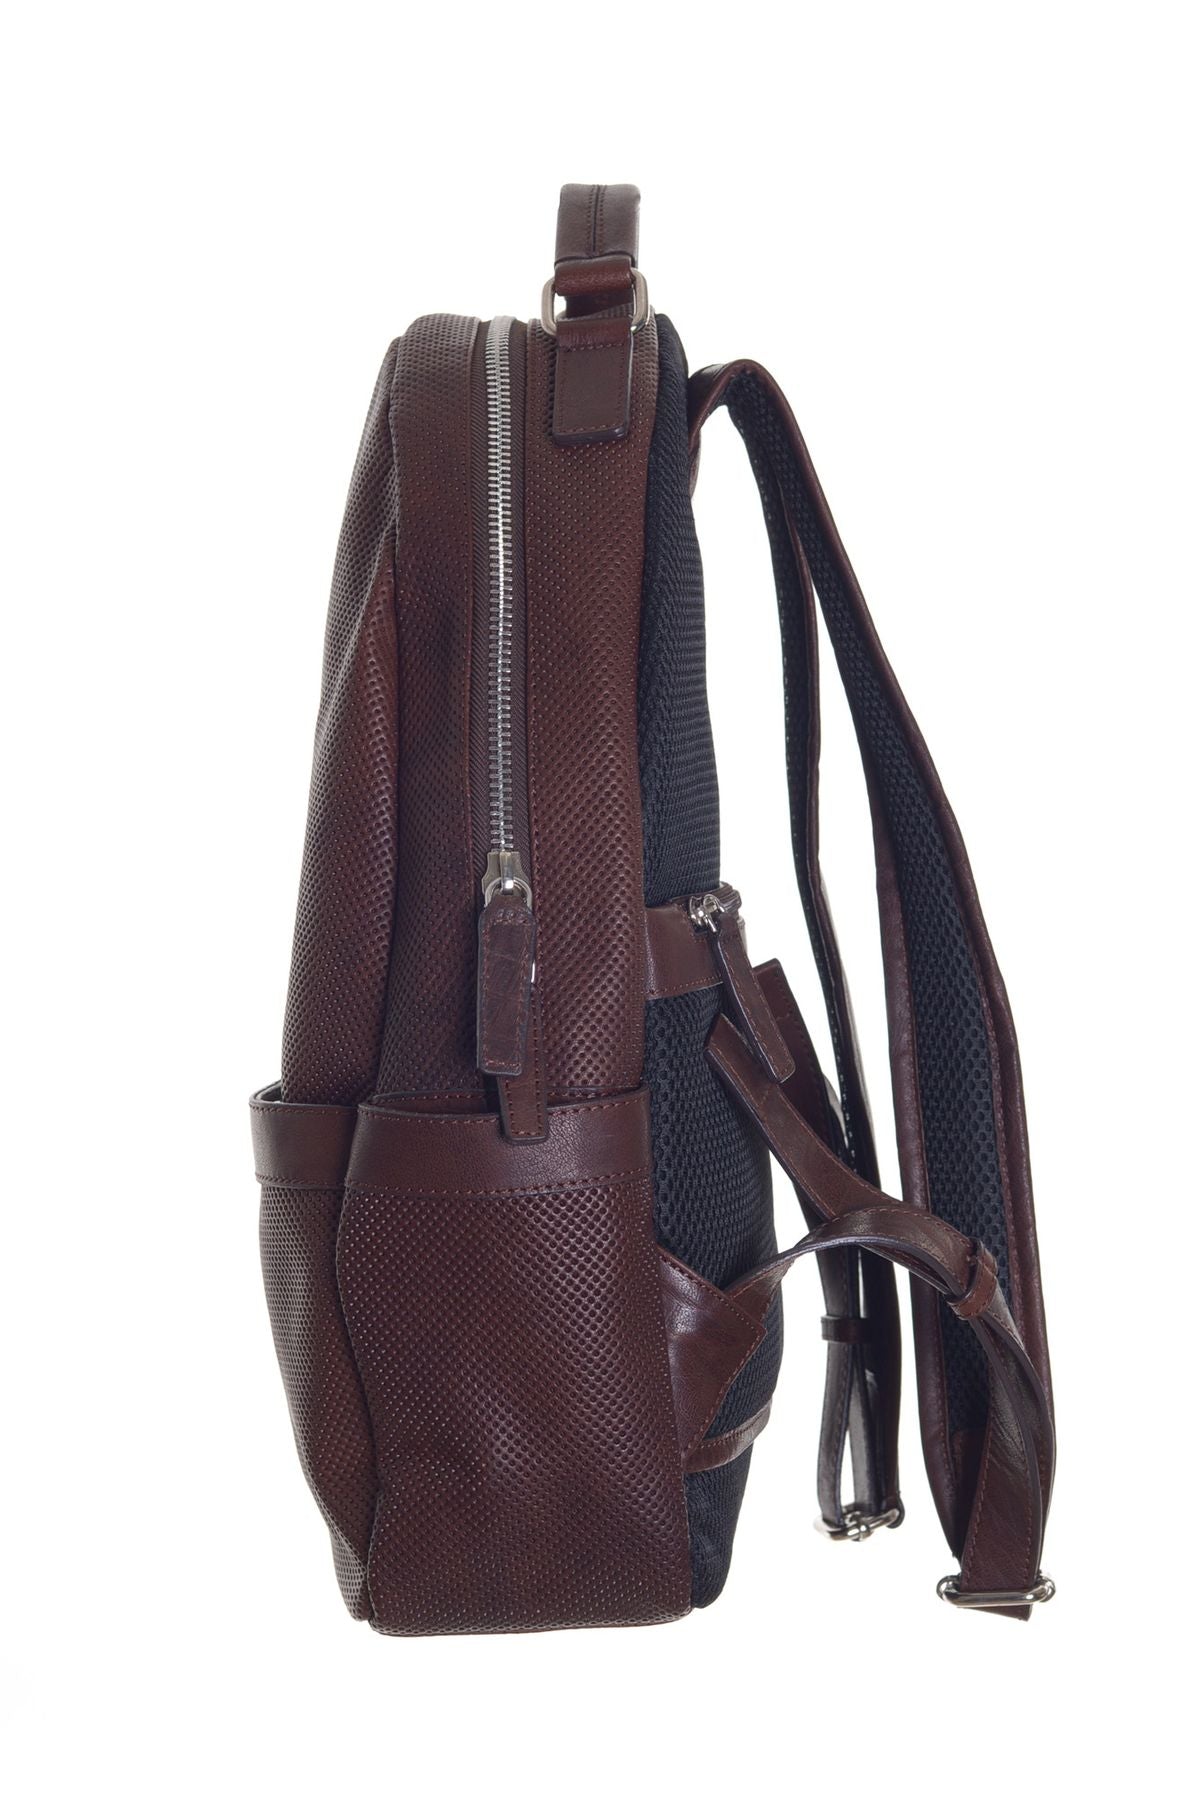 The Jack Leathers Autumn/Winter Leather Backpacks